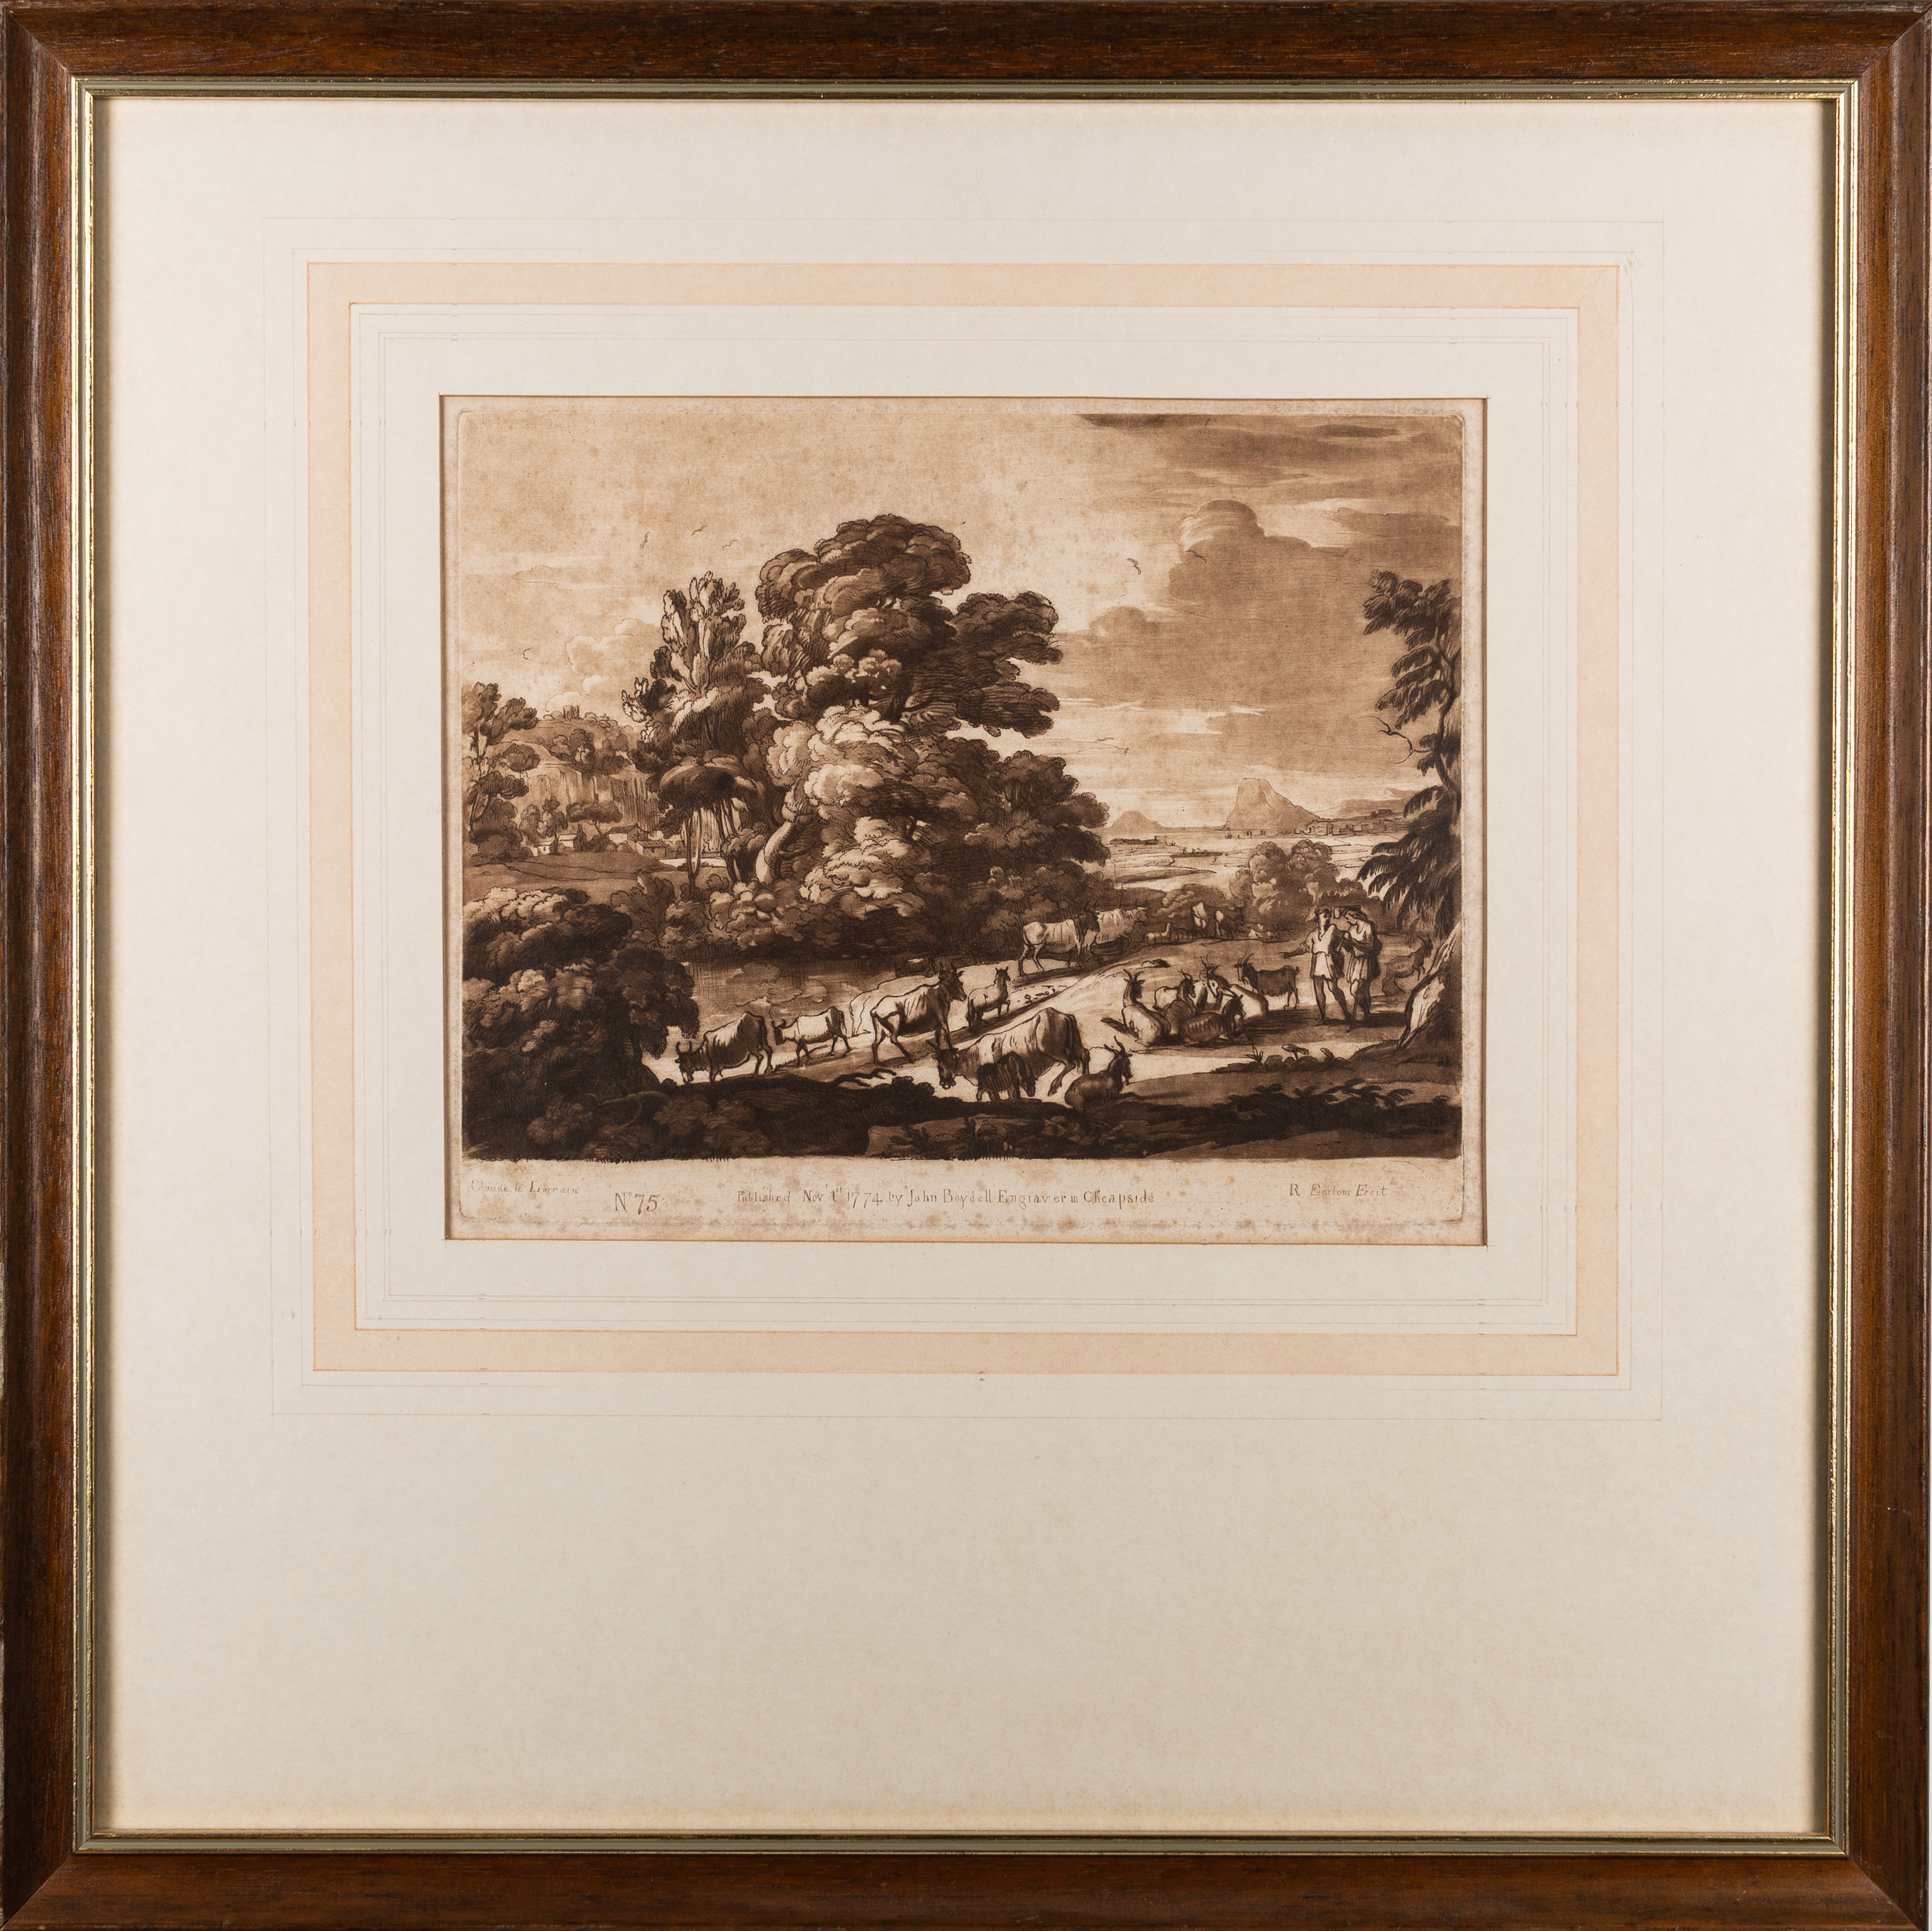 EARLOM, Richard. Mezzotints after Claude Lorrain, No.69 Landscape with Samuel anointing David & No. - Image 2 of 2